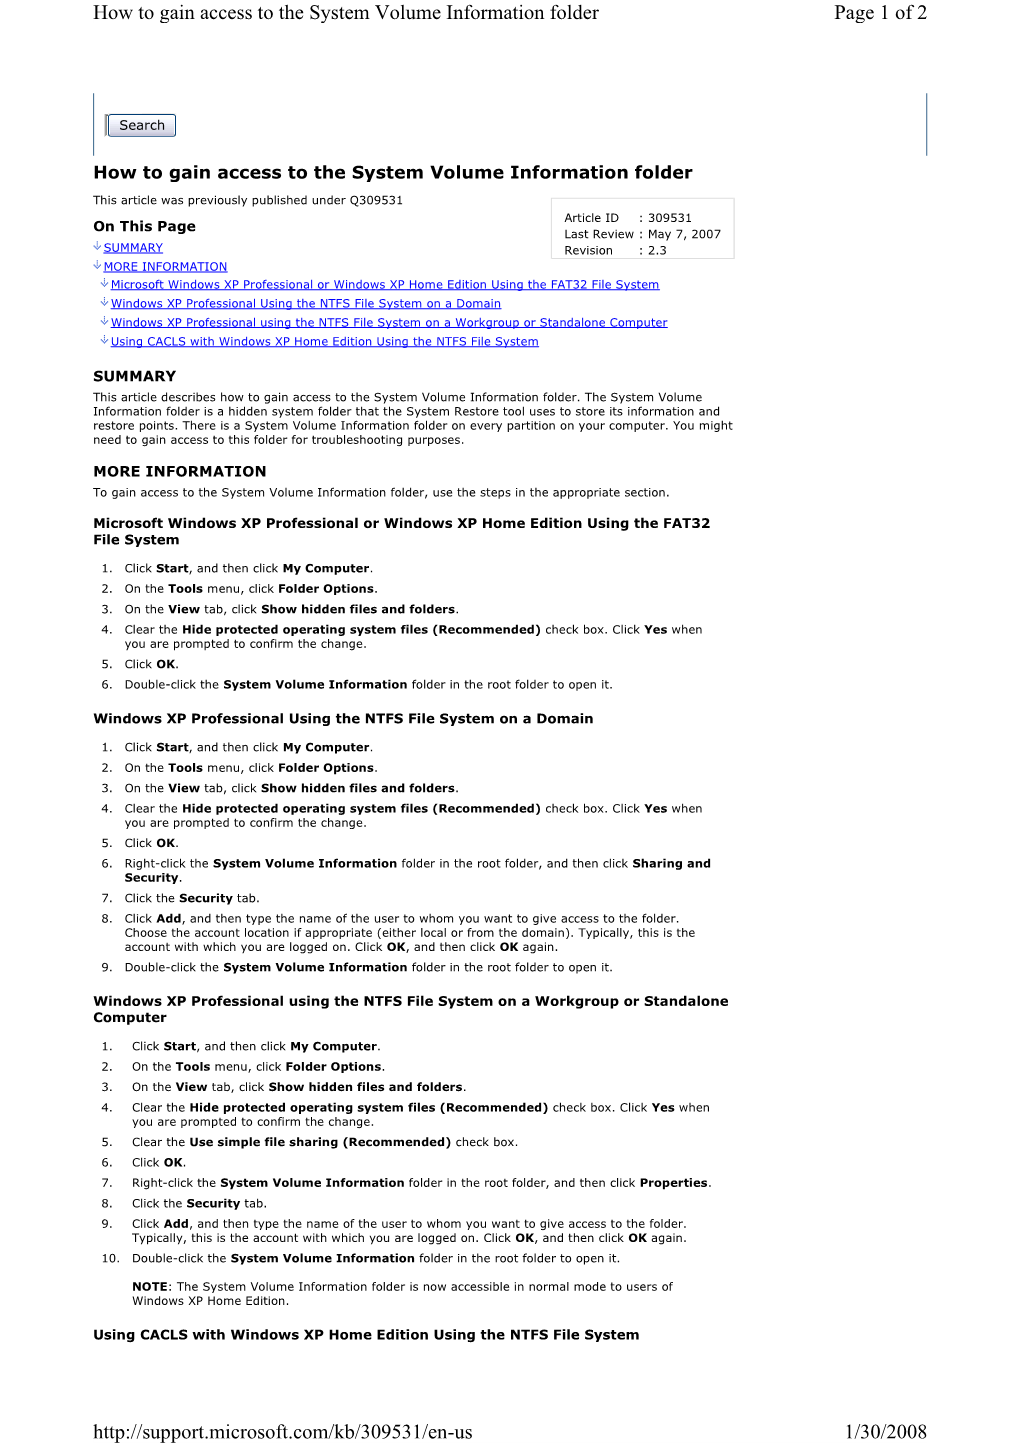 How to Gain Access to the System Volume Information Folder Page 1 of 2